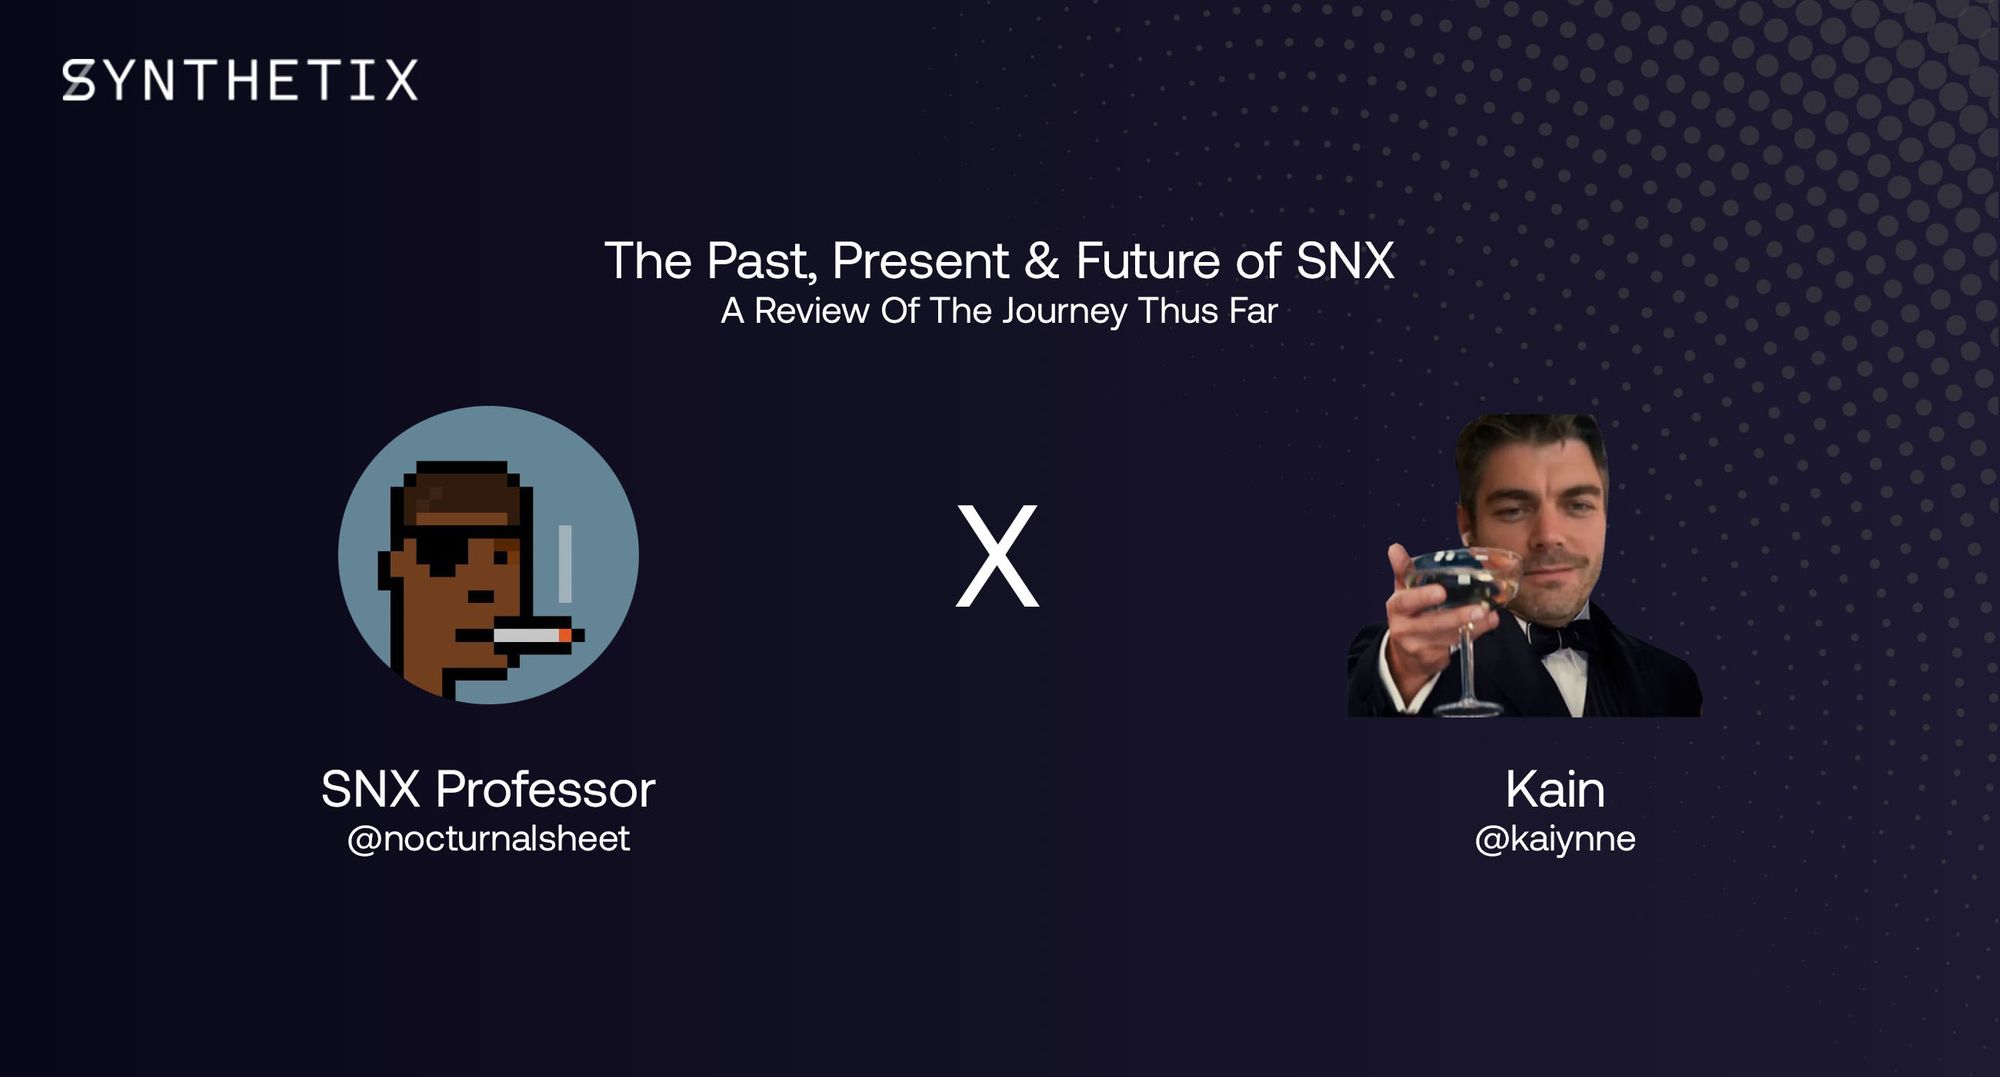 Interview: The Past, Present & Future of Synthetix with the SNX Professor and Kain